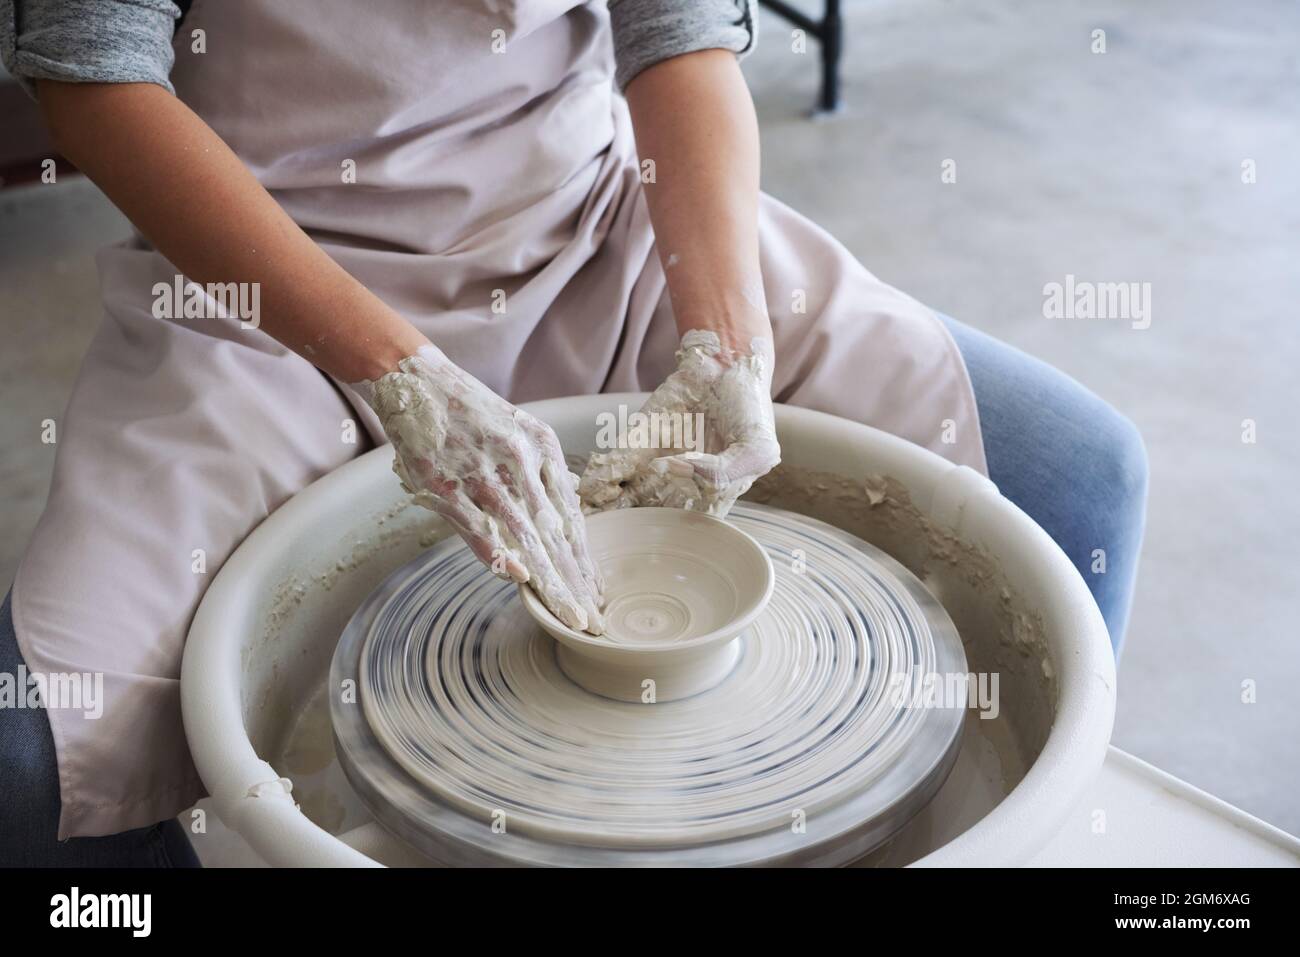 Master class in pottery workshop, woman making dish out of white clay Stock Photo